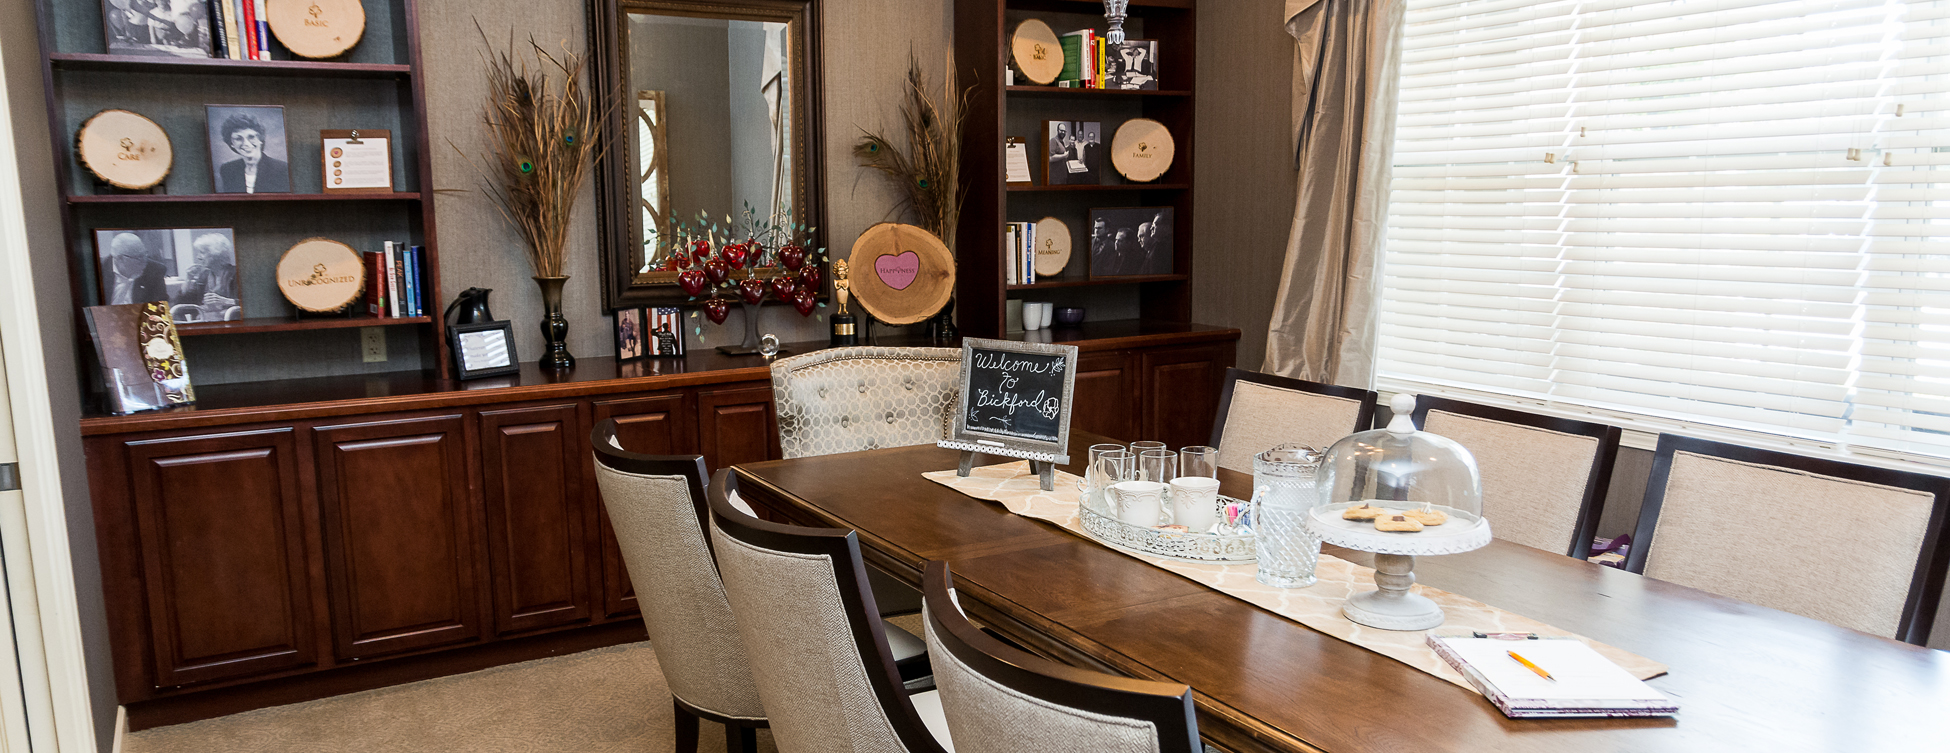 Food is best when shared with family and friends in the private dining room at Bickford of Oswego